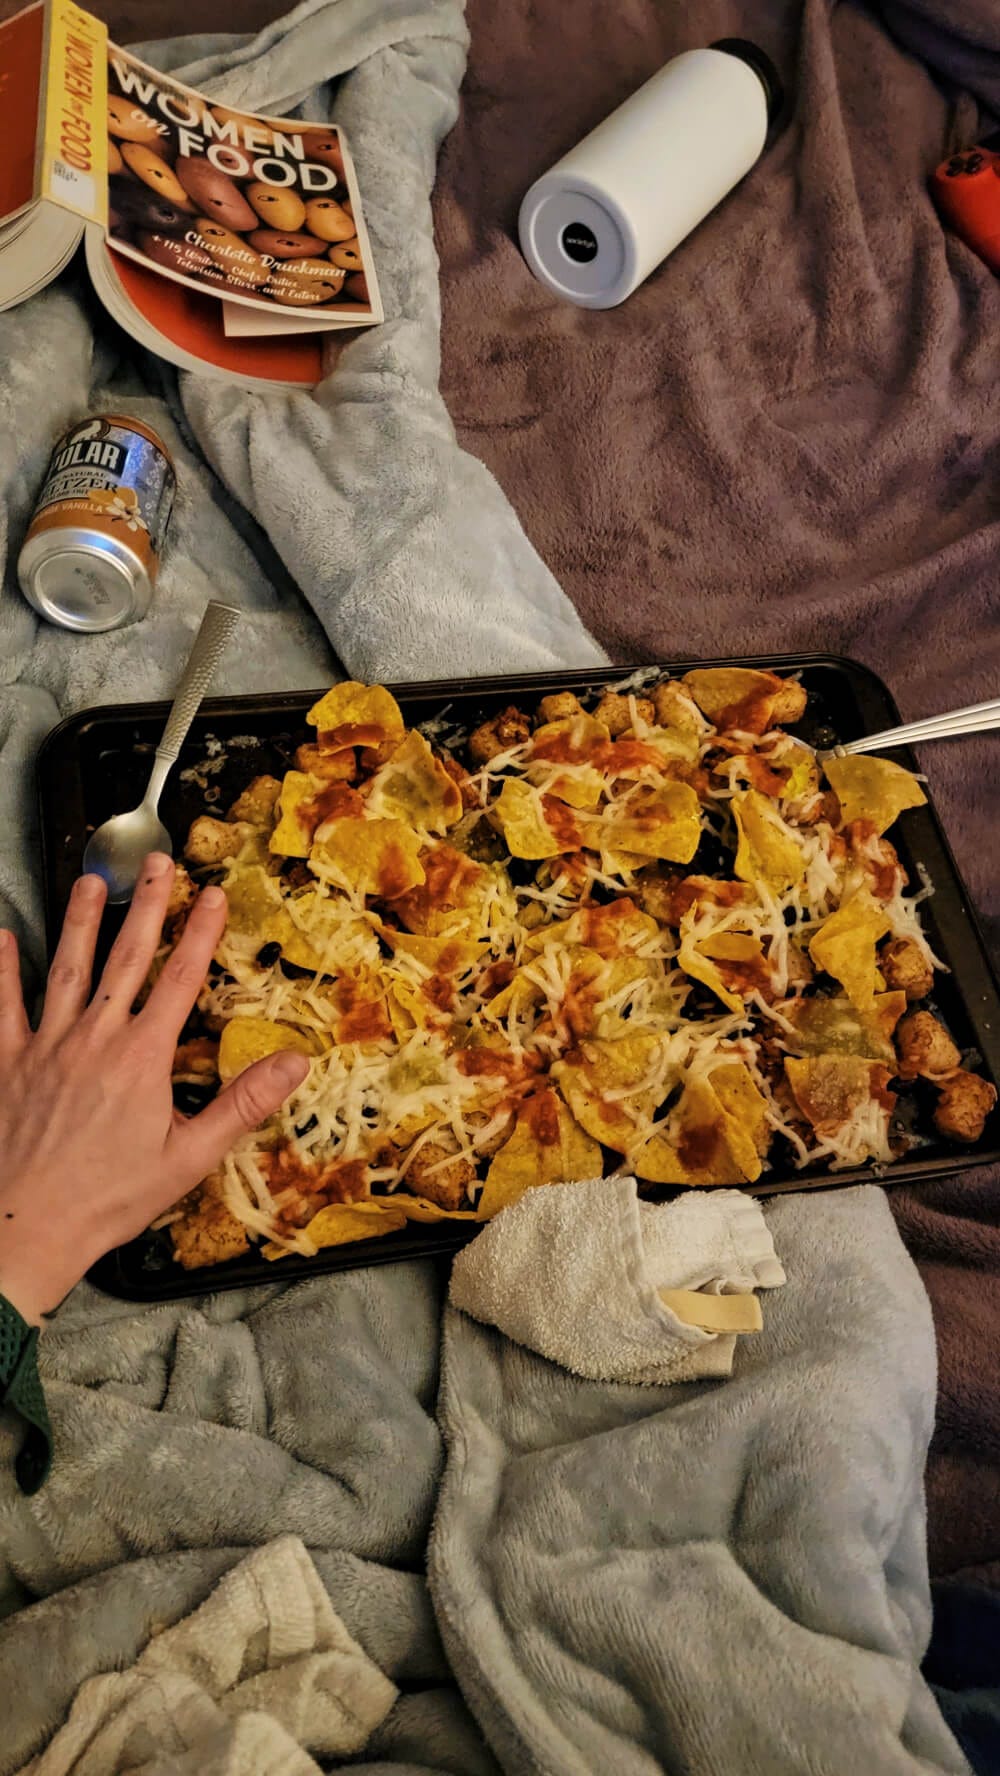 The main attraction of this dimly lit image is a dark metal sheet tray overflowing with a pile of tater tots, corn tortilla chips, tomato and tomatillo salsas, vegan mozzarella cheese, rested on top of two cozy blankets. Posted next to Grace’s small hand, for scale, taking up about 1/6 of the tray. Other items splayed across the blankets include: an orange vanilla Polar seltzer, the anthology, Women on Food, a water canteen, napkins, and the edge of a play station controller. 